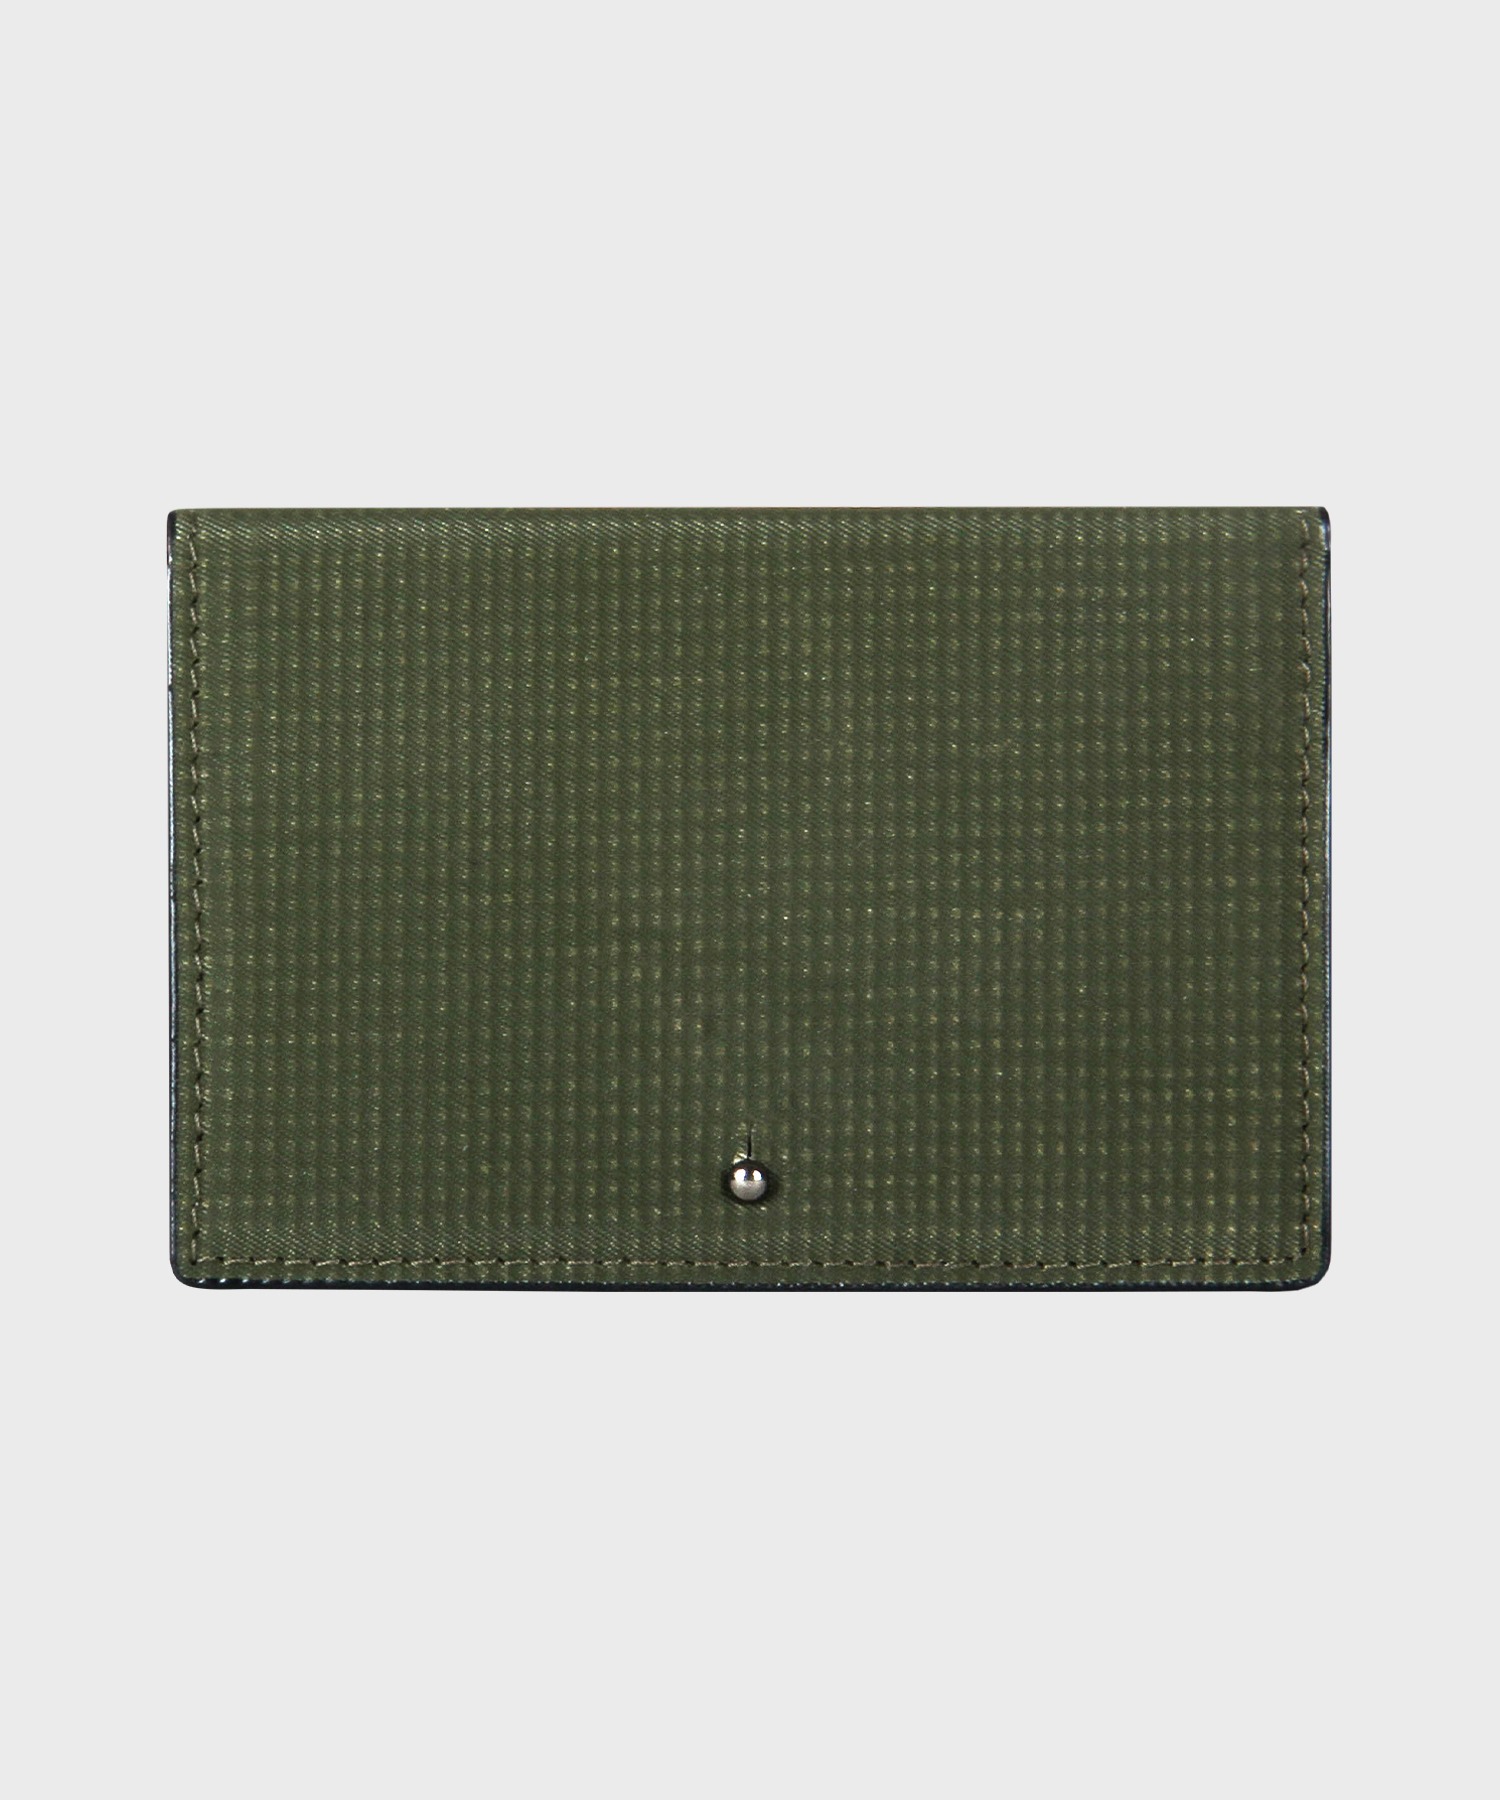 OM BUTTON STUD WALLET (OLIVE DRAB) / UPCYCLED